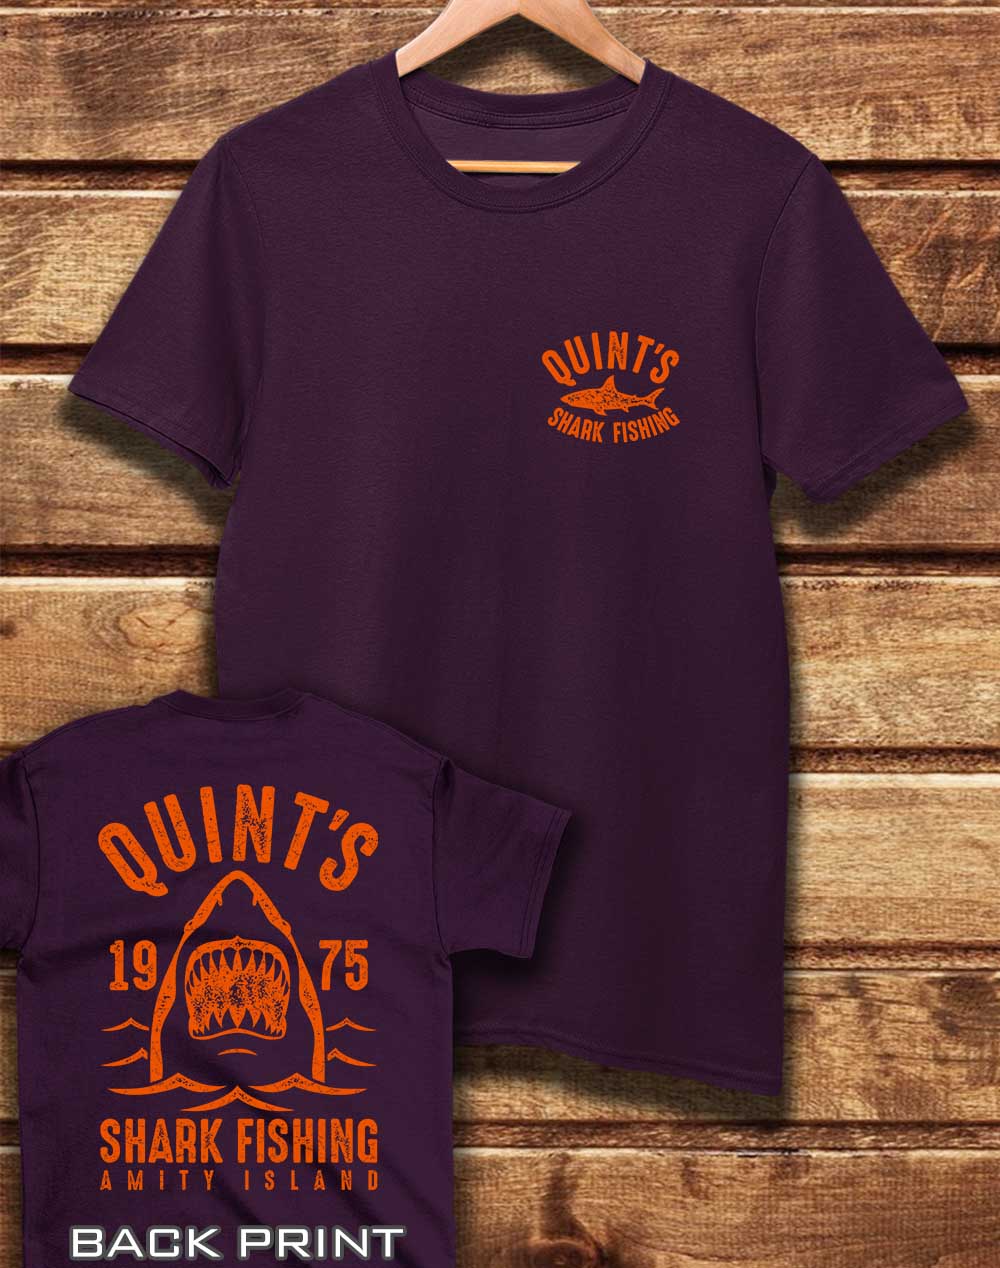 Eggplant - DELUXE Quint's Shark Fishing with Back Print Organic Cotton T-Shirt